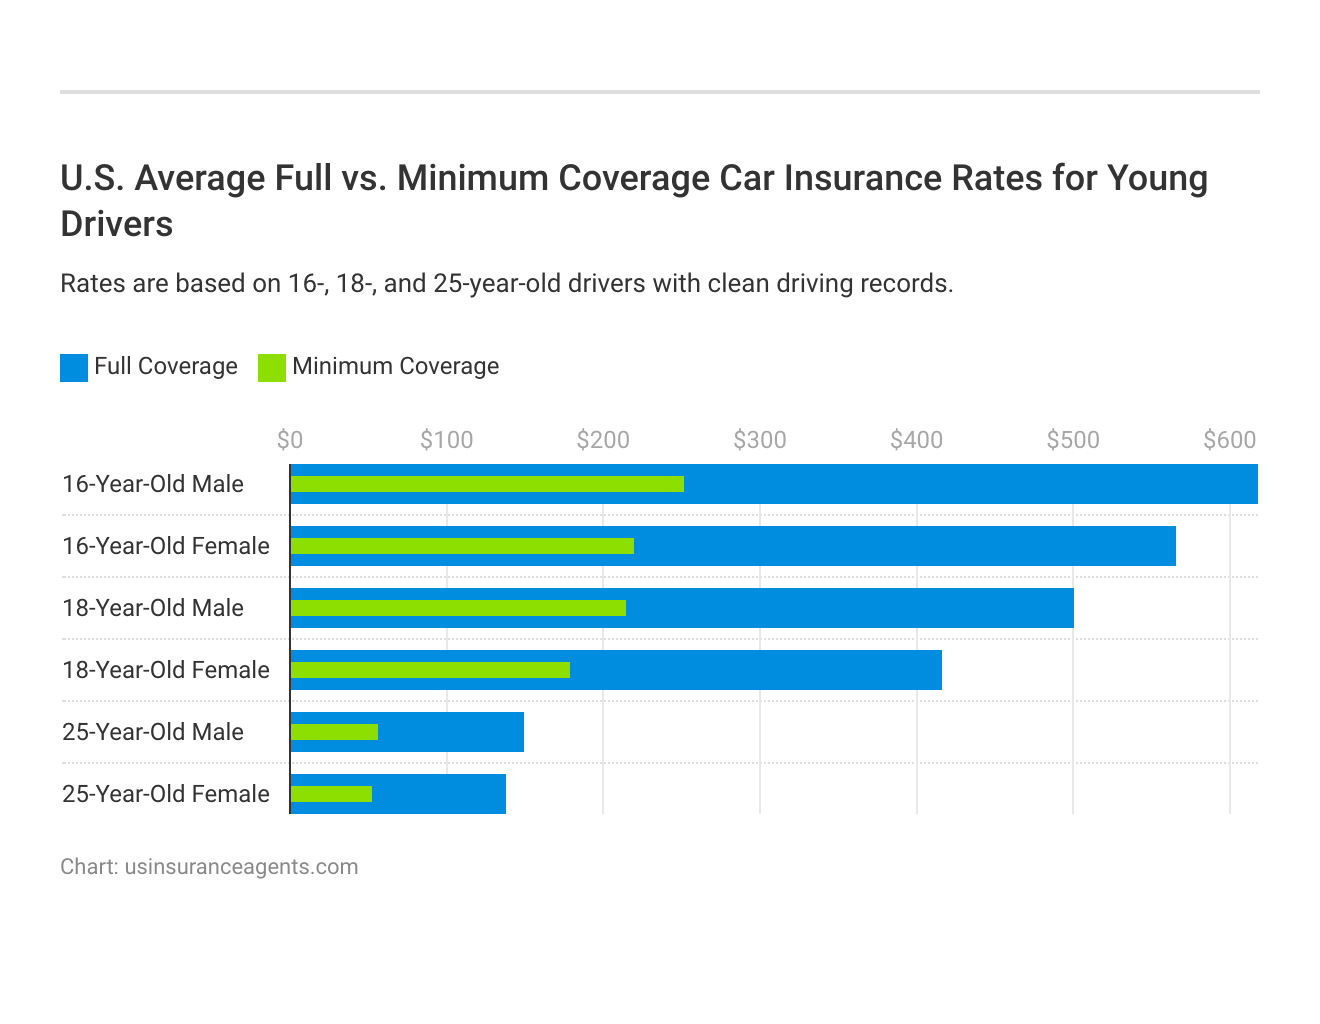 <h3>U.S. Average Full vs. Minimum Coverage Car Insurance Rates for Young Drivers</h3>